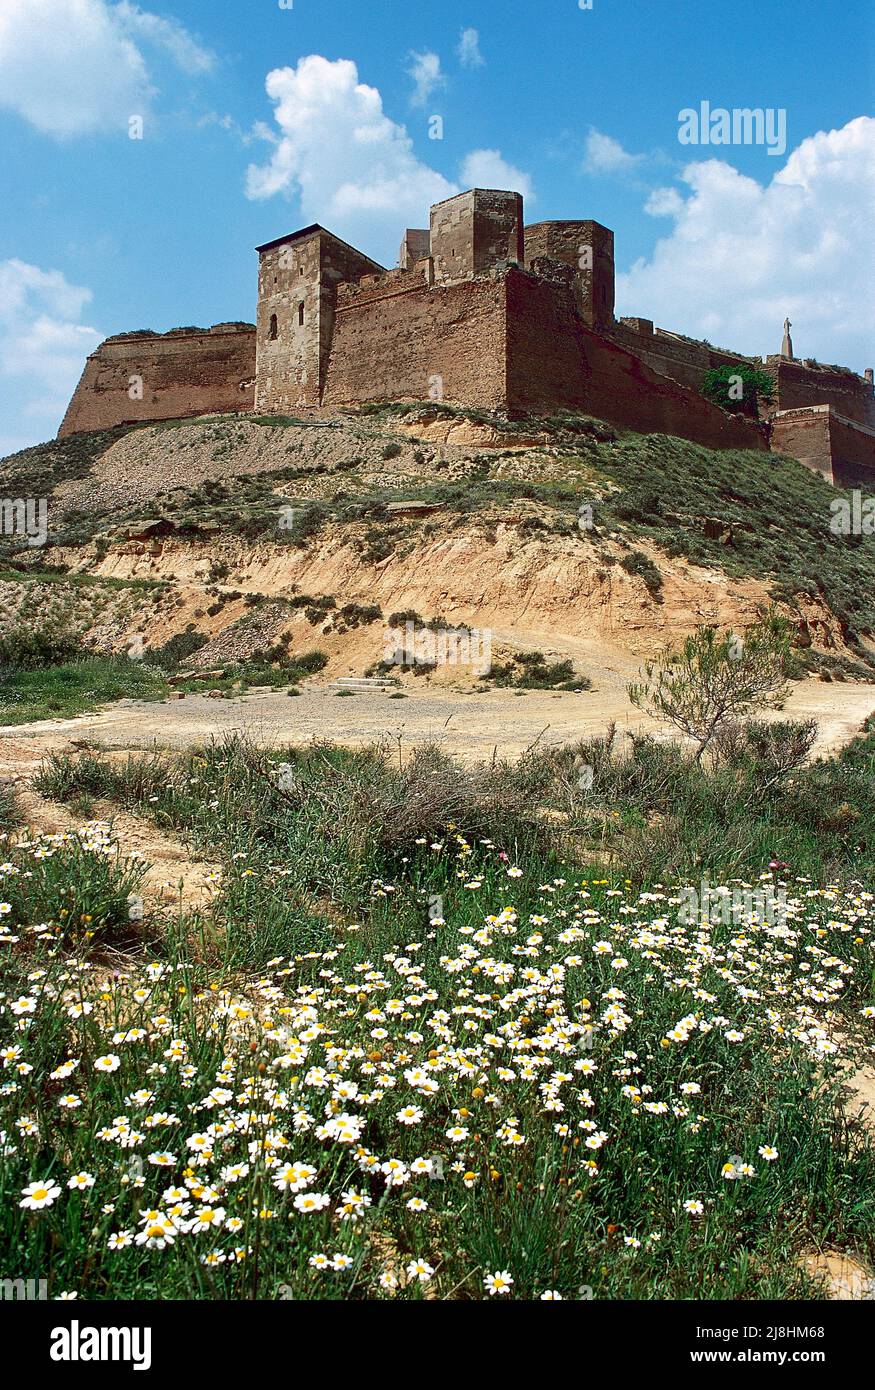 Spain, Aragon. Monzón Castle. It was built in the 10th century by Banu Hud dynasty and donated by Ramon Berenguer IV to the Knights Templar in 1143. Stock Photo